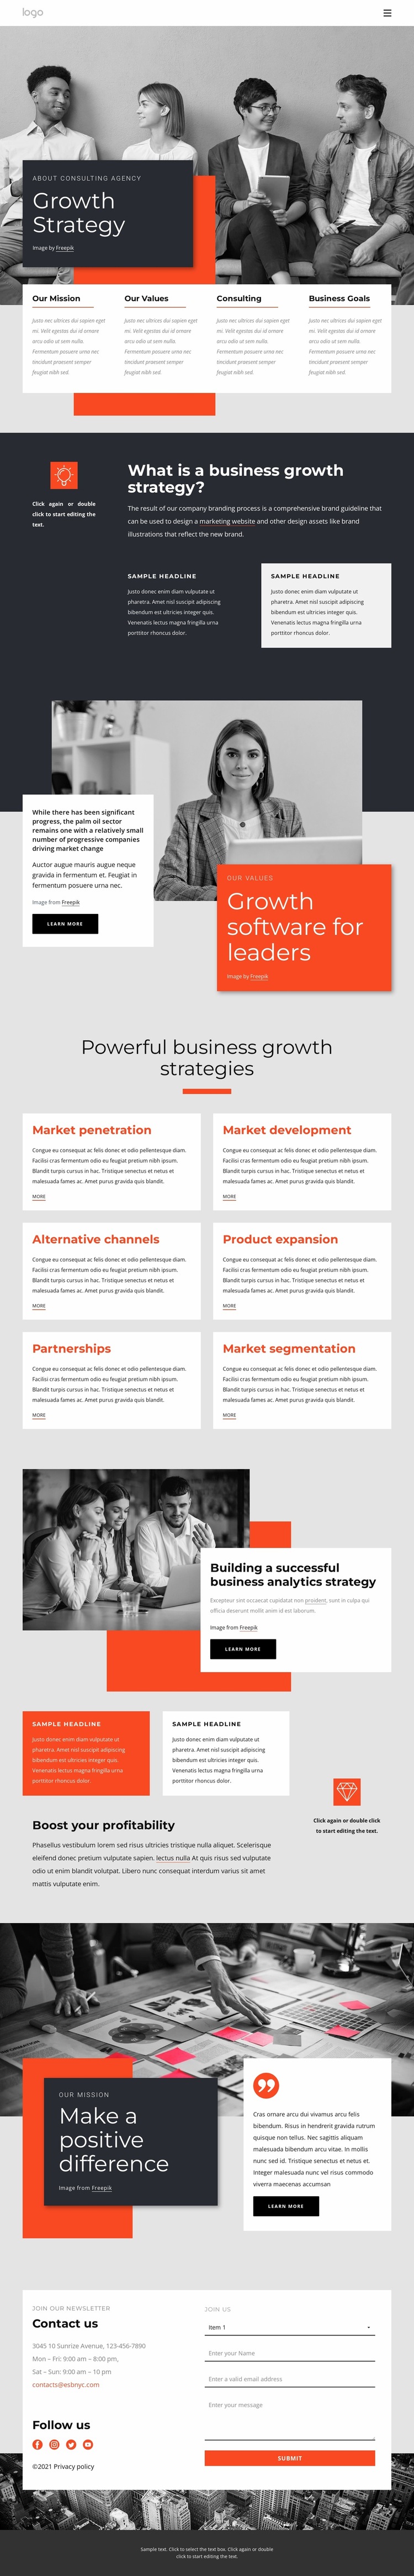 Growth strategy consultants Website Builder Templates